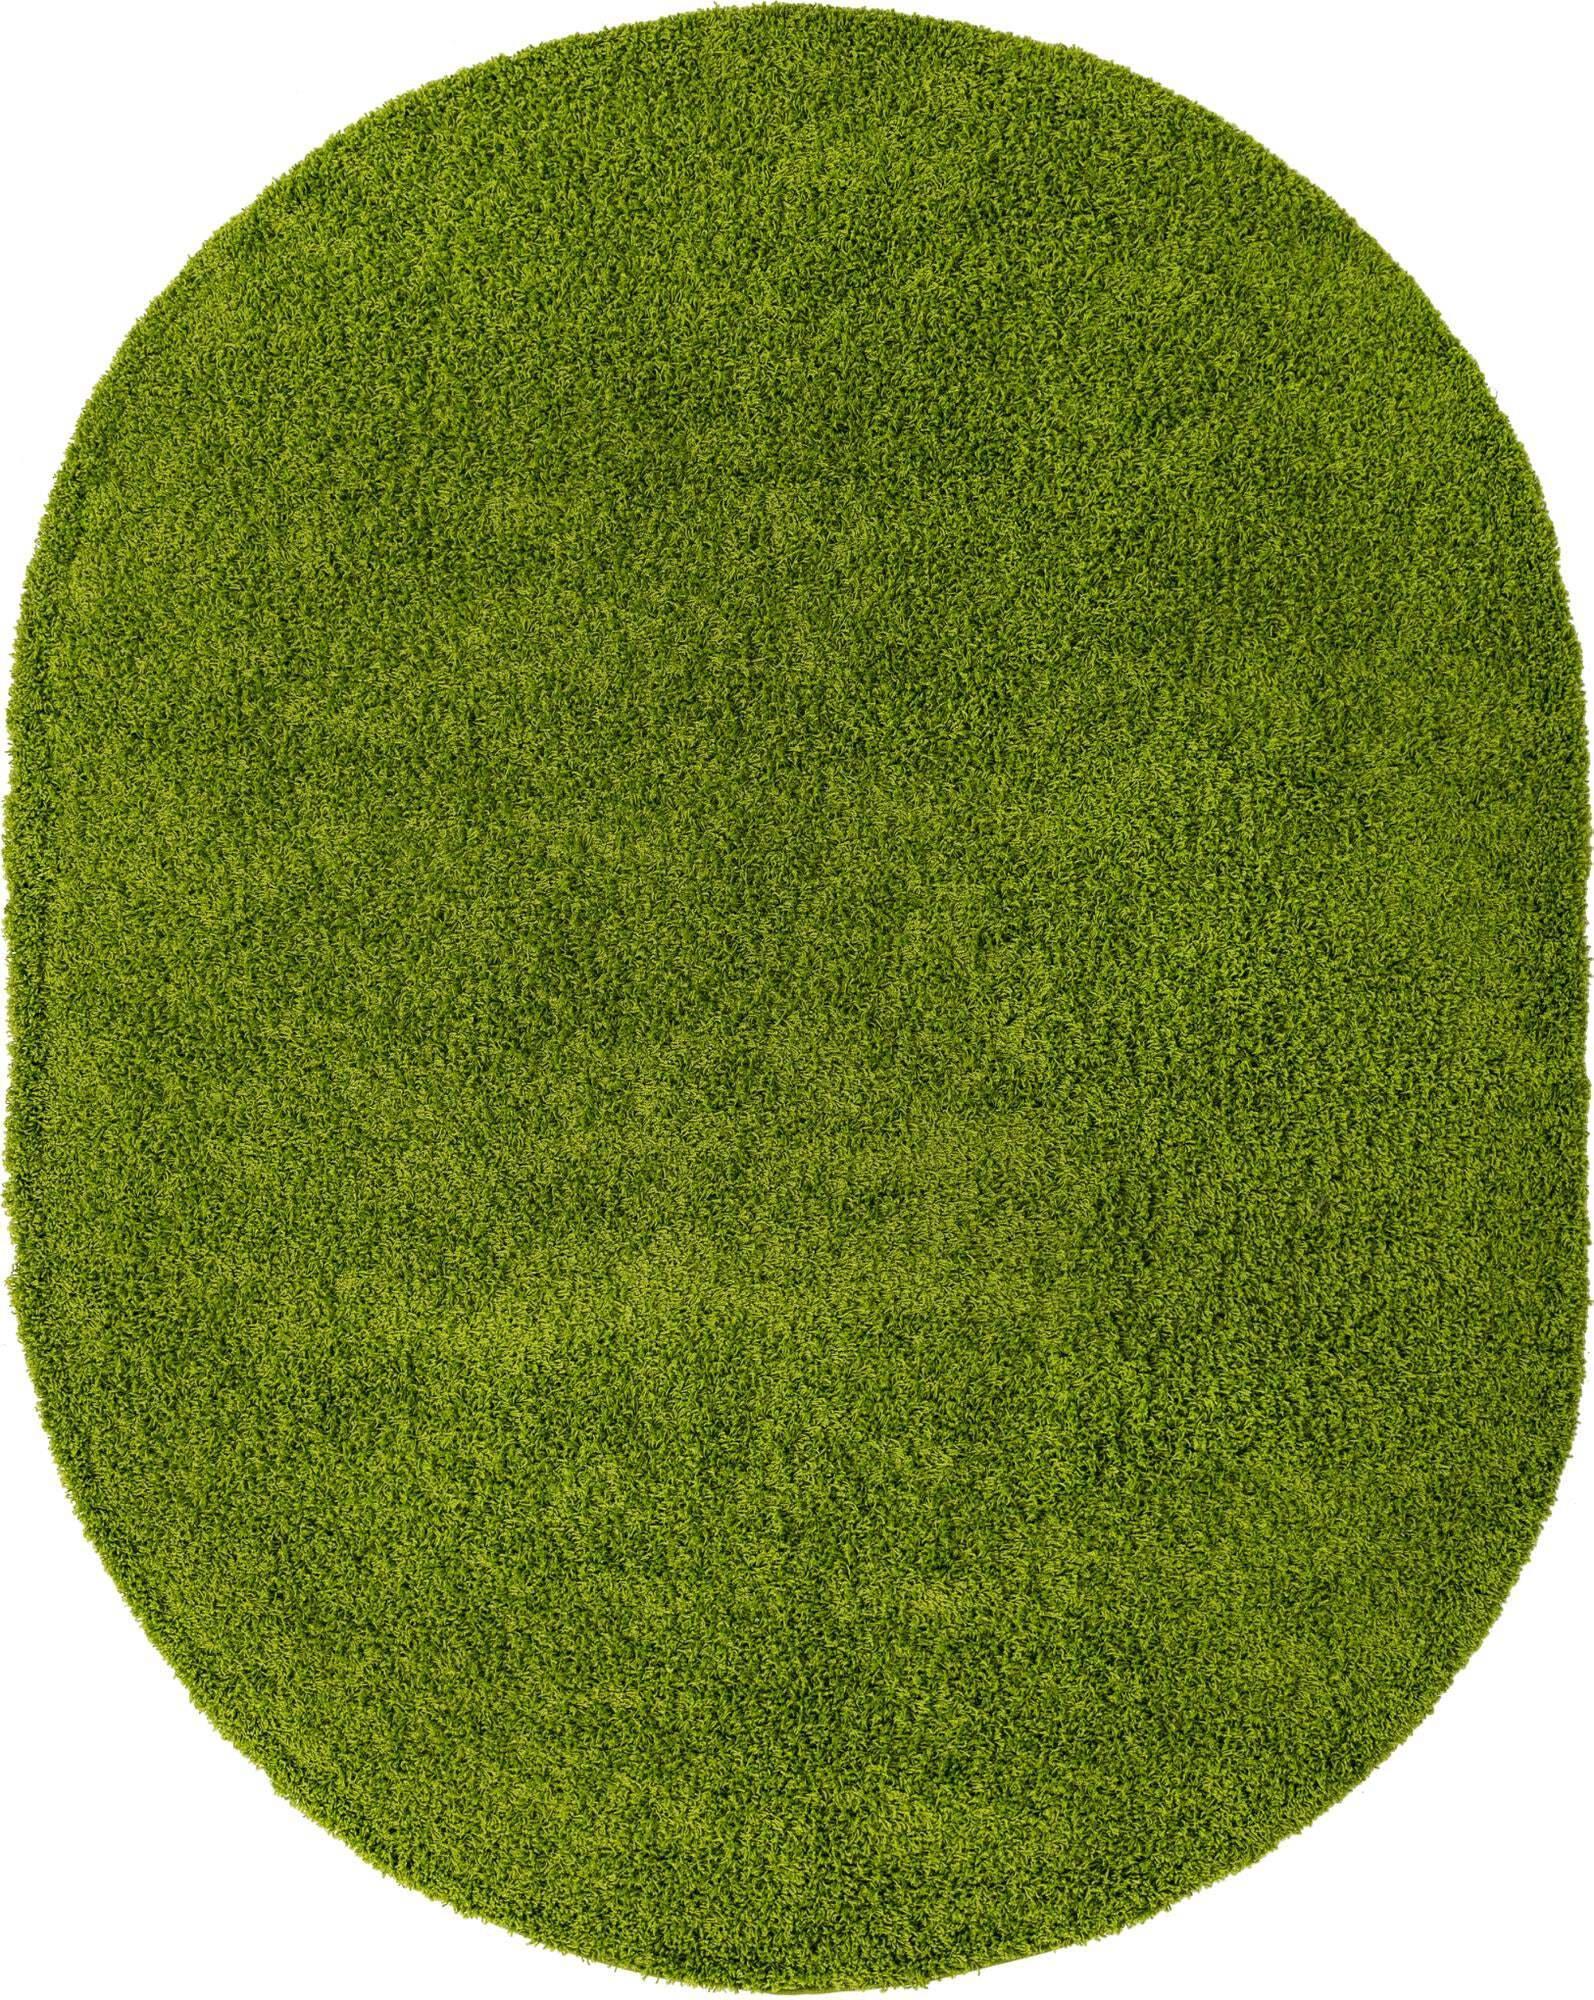 Unique Loom Indoor Rugs - Solid Shag Solid Oval 8x10 Oval Rug Grass Green